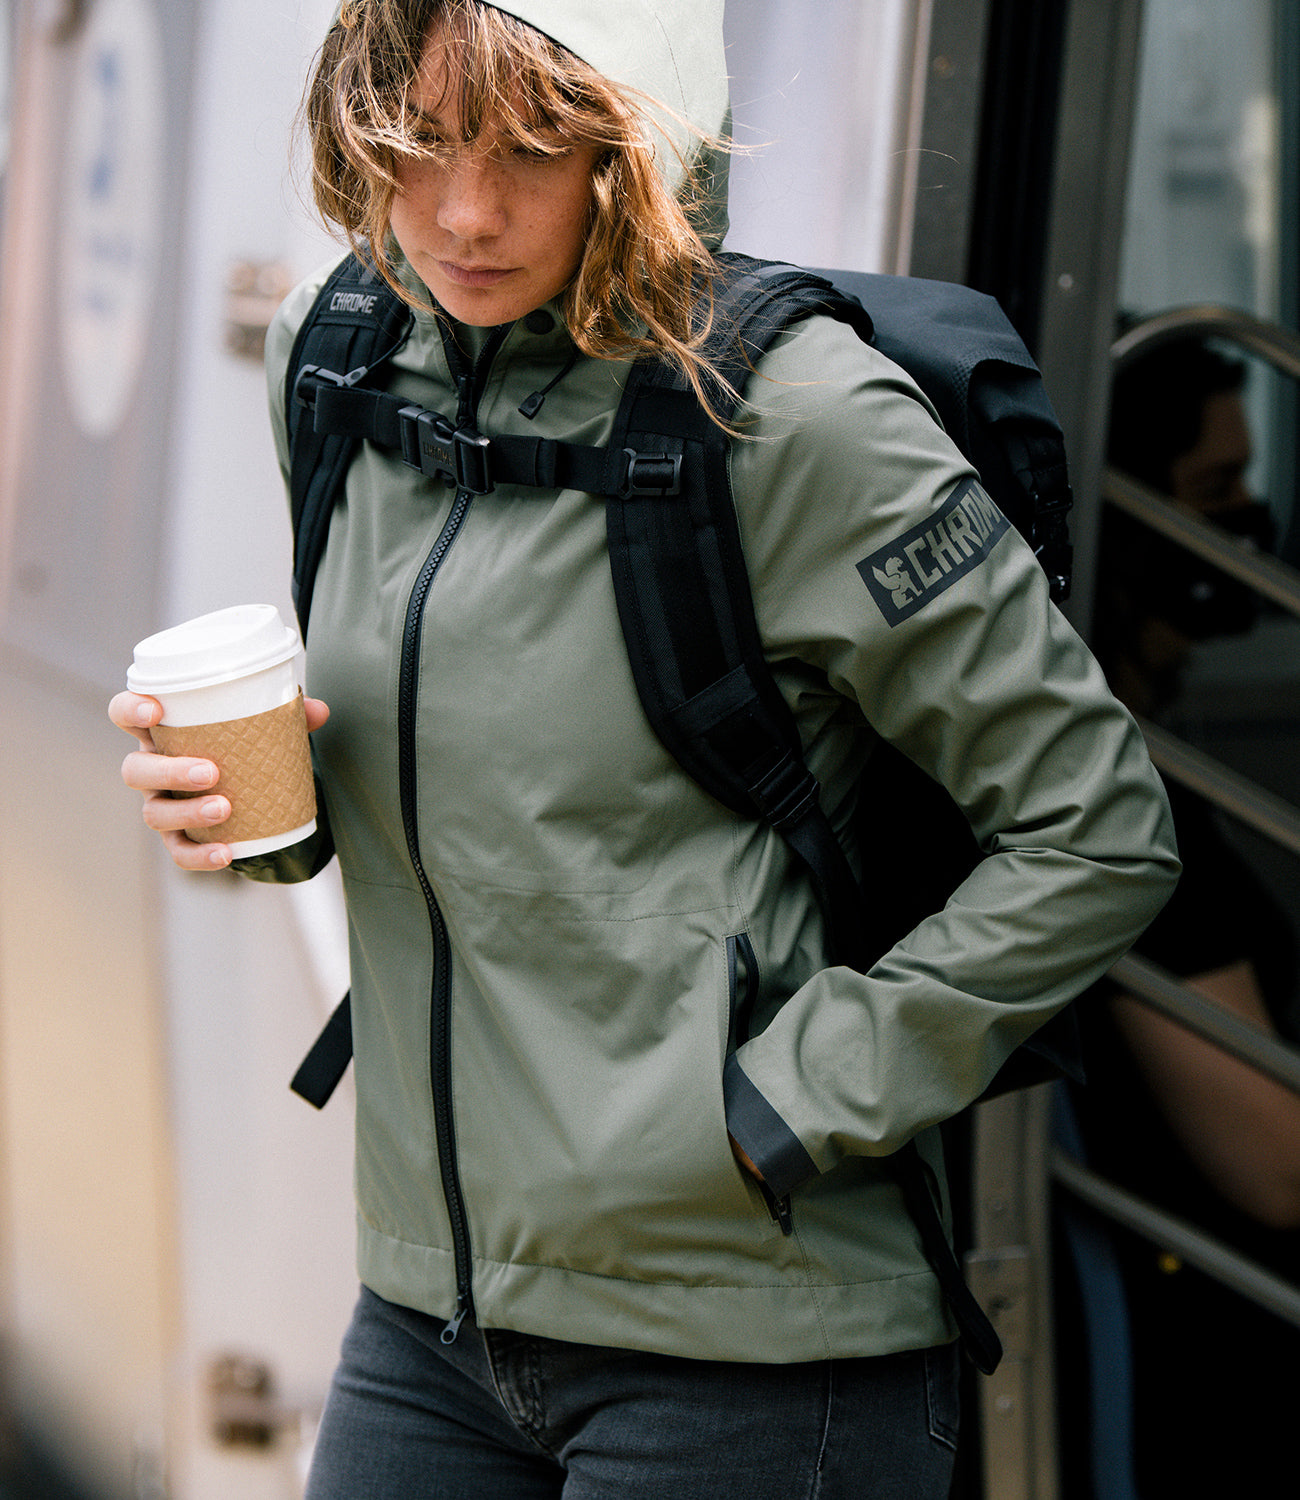 Woman's Storm Salute Commute Jacket in green worn by a woman mobile size 